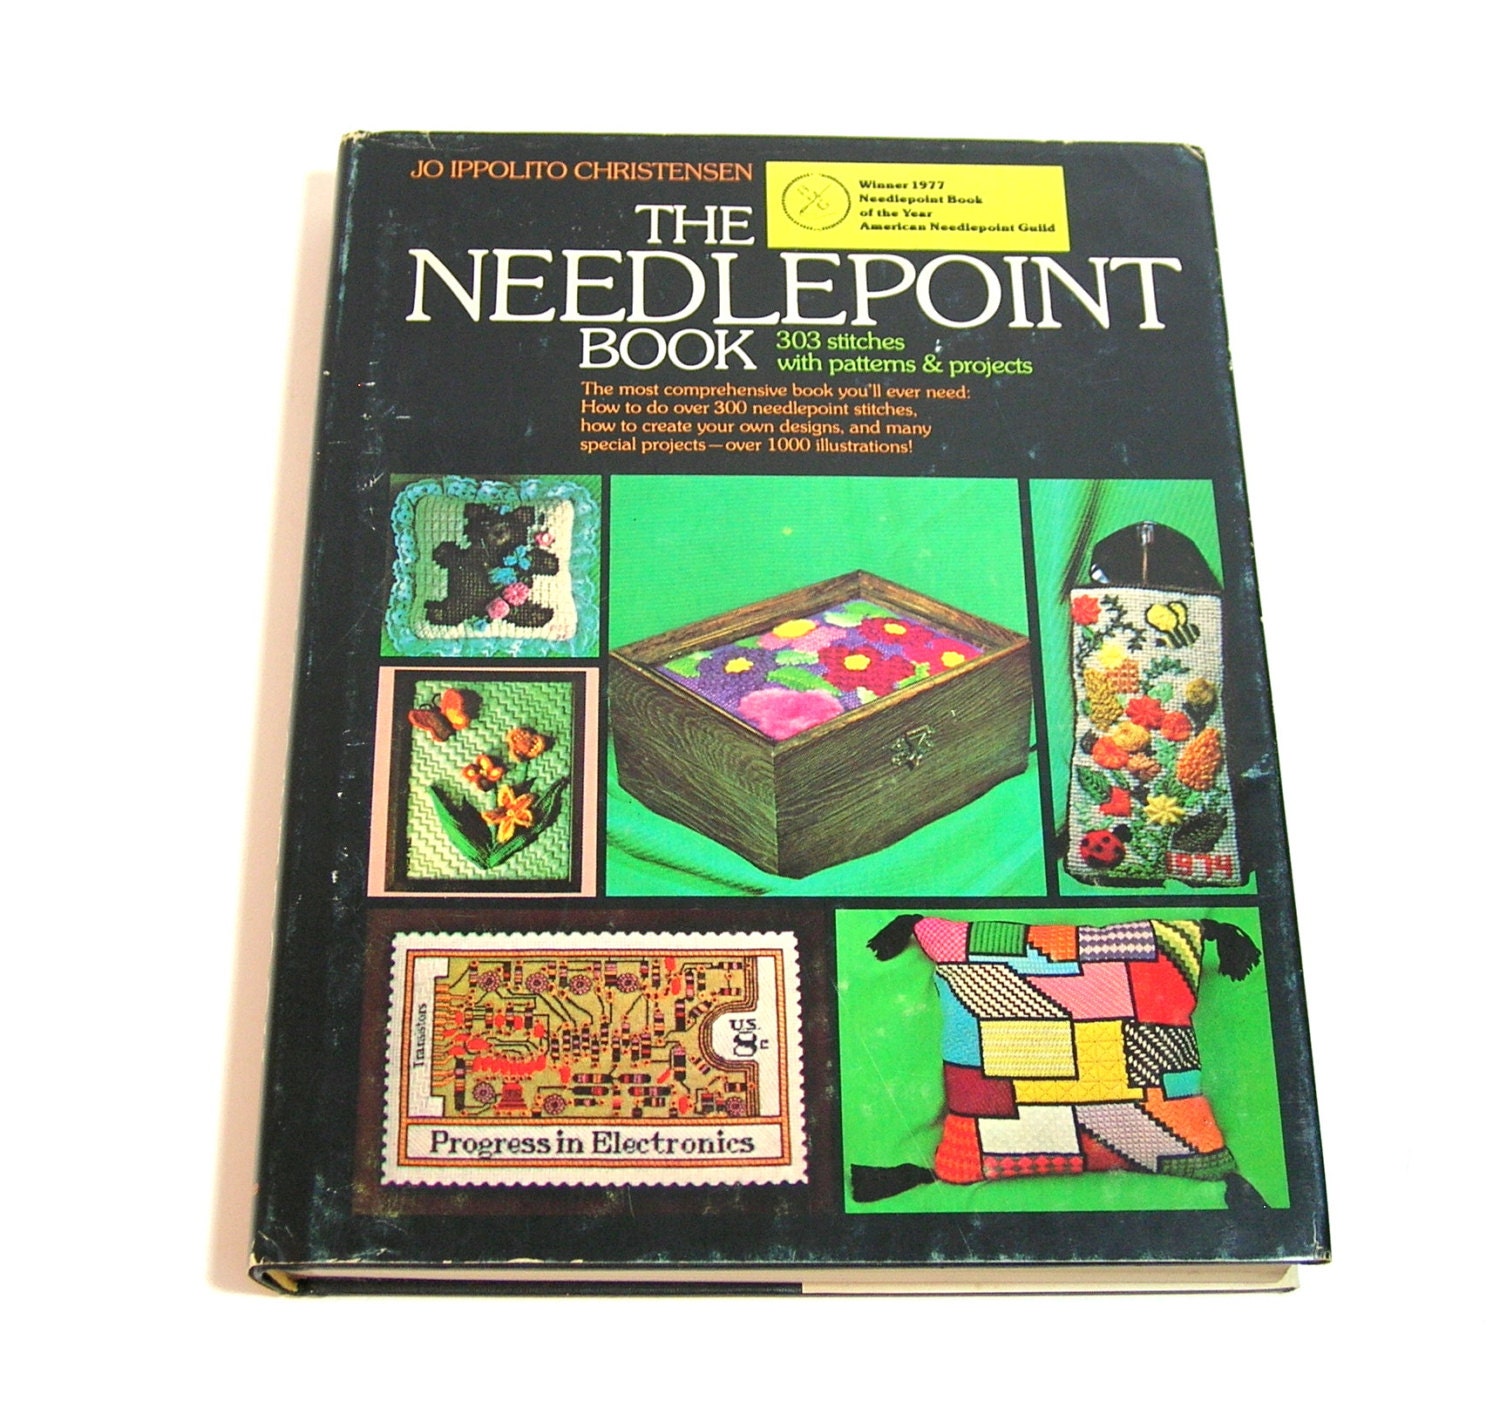 The Needlepoint Book 303 Stitches With Patterns & Projects by Jo Ippolito  Christensen Vintage Needlepoint Embroidery Book Vintage 1970's 